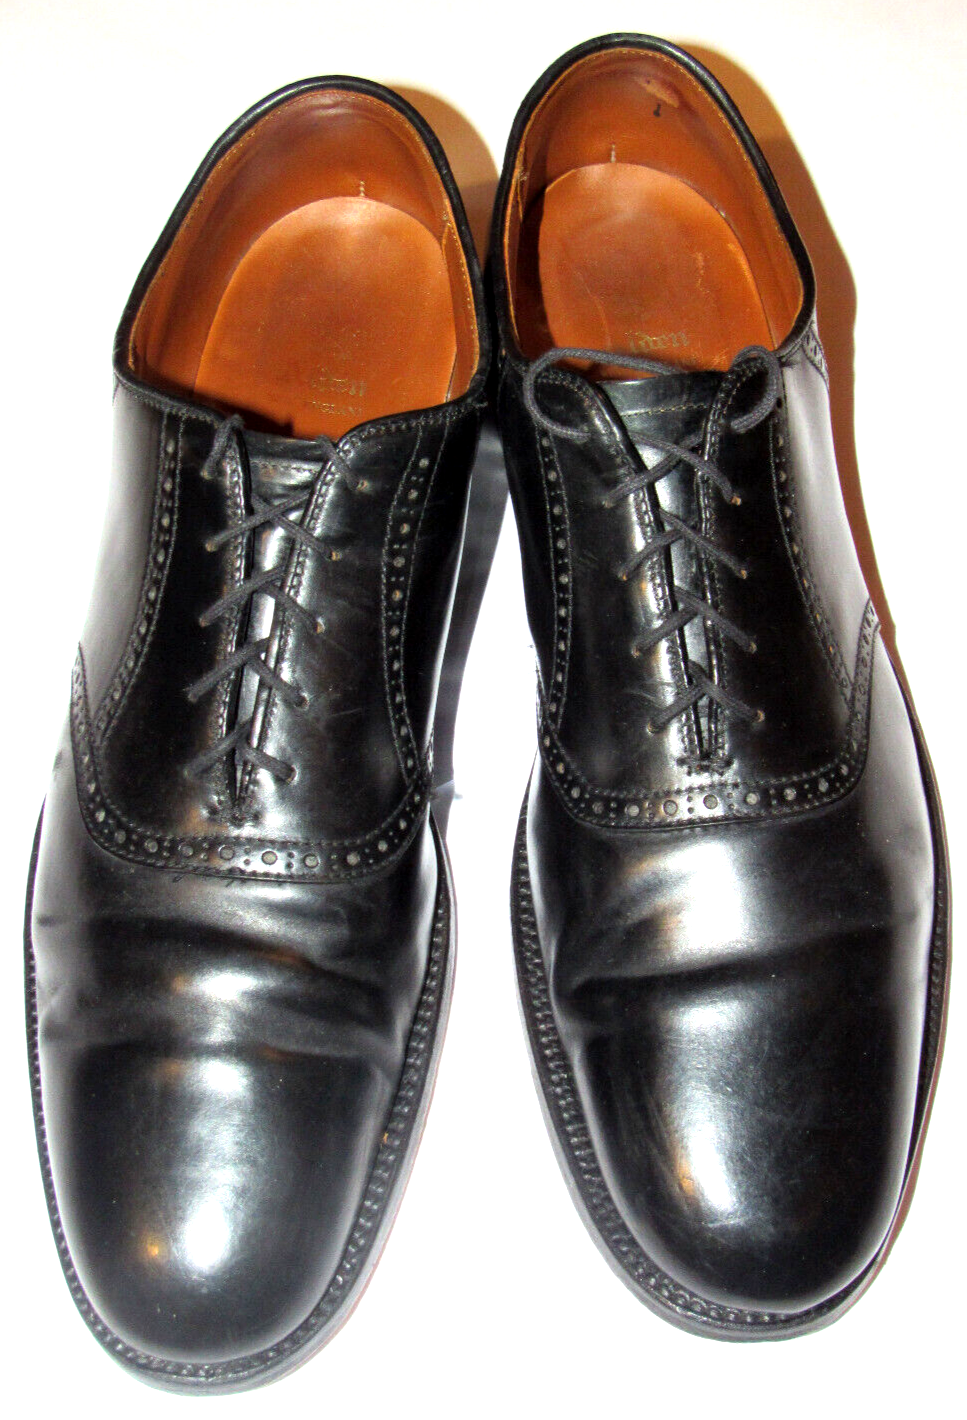 ALDEN TRADITIONAL SADDLE OXFORD SHELL CORDOVAN LEATHER SHOES! 993 USA 13 AA